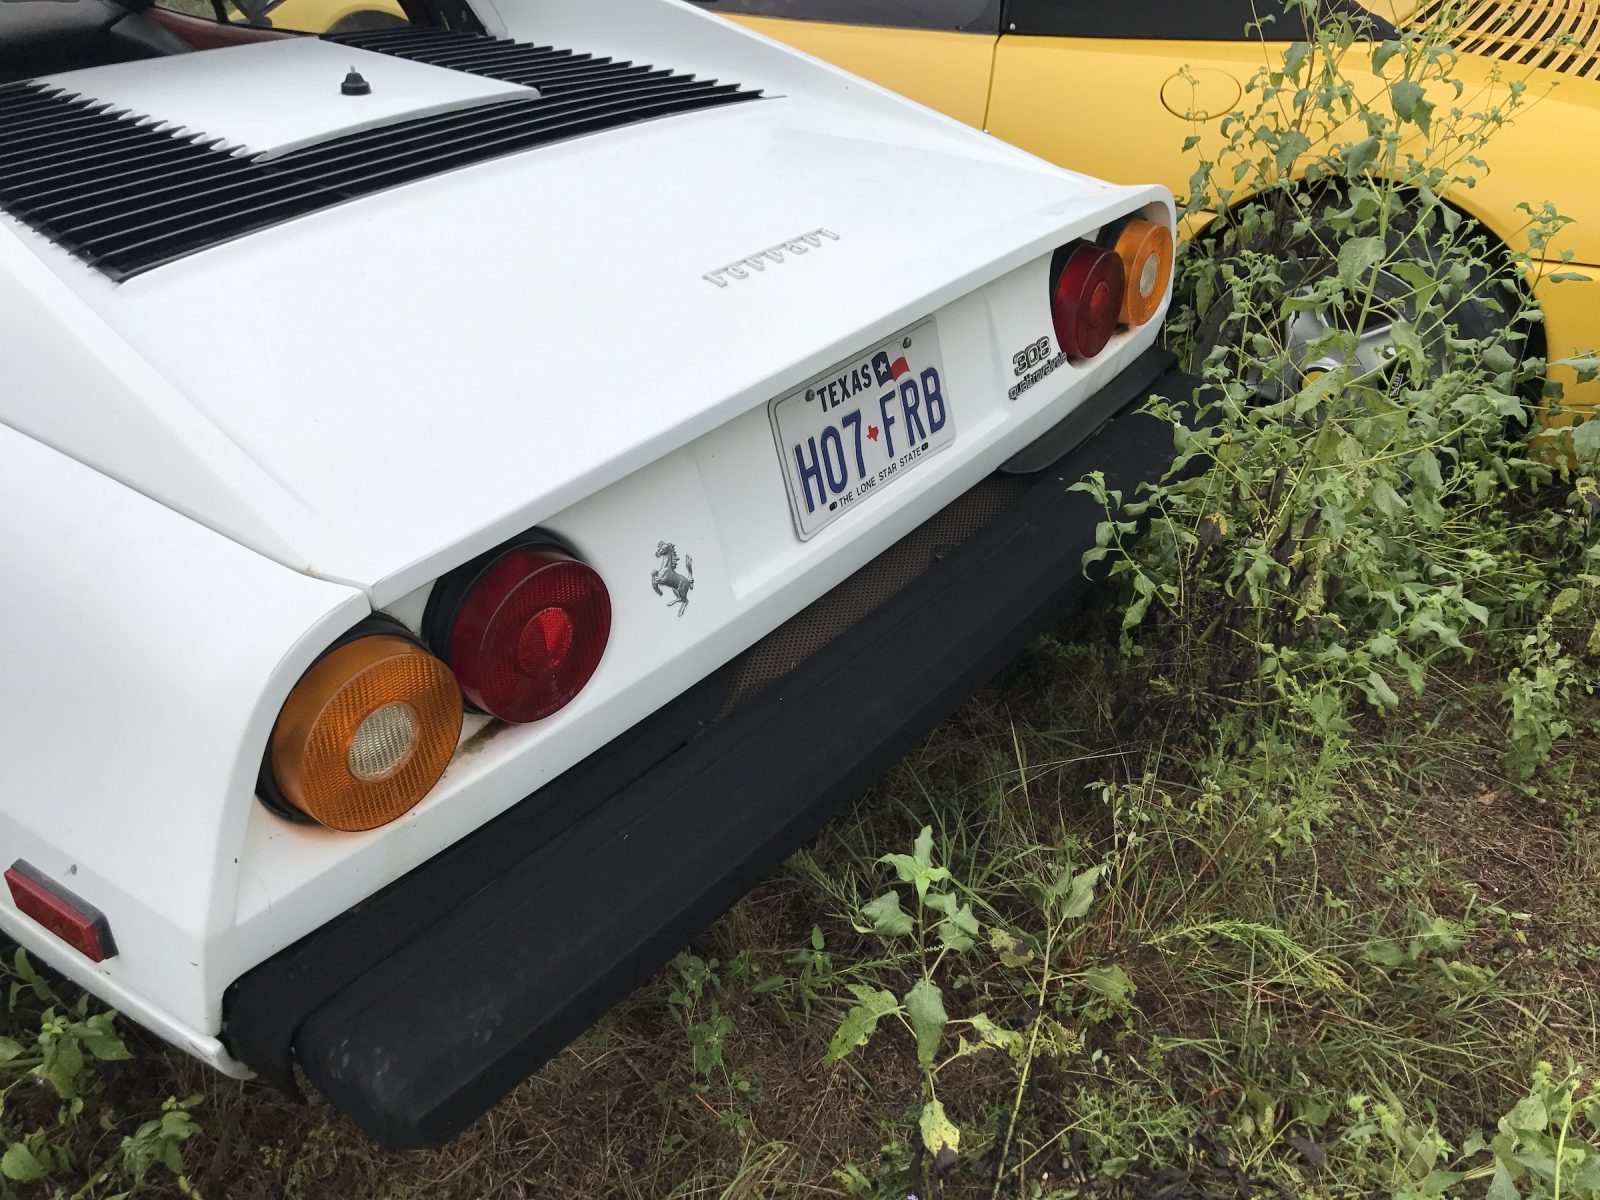 The Field Of Abandoned Ferraris (And How They Got There)